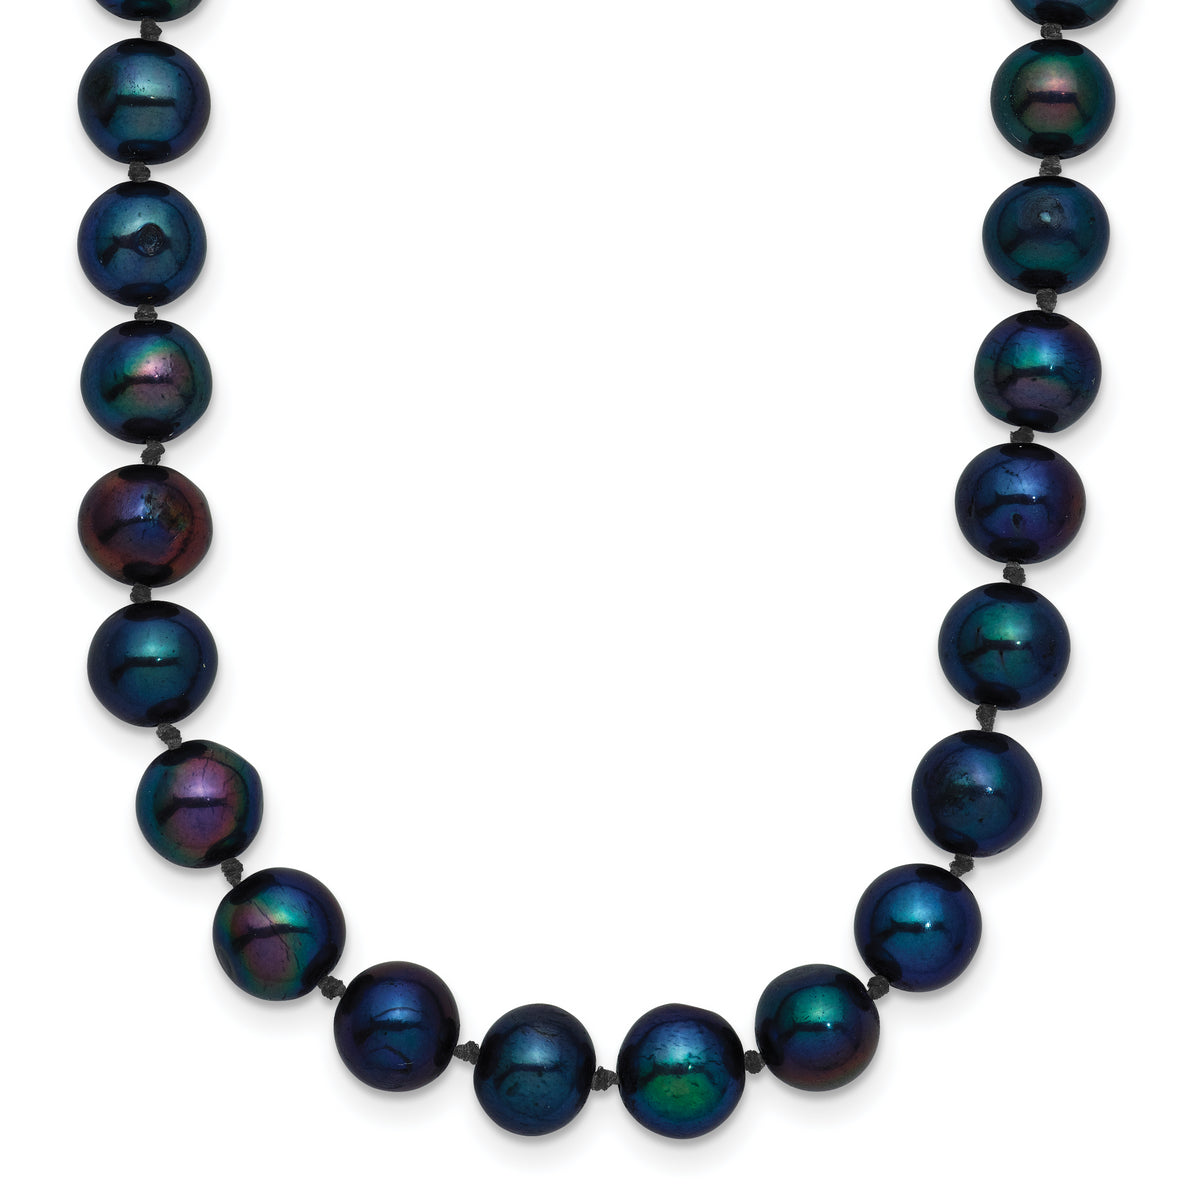 14k 6-7mm Black Near Round Freshwater Cultured Pearl Necklace